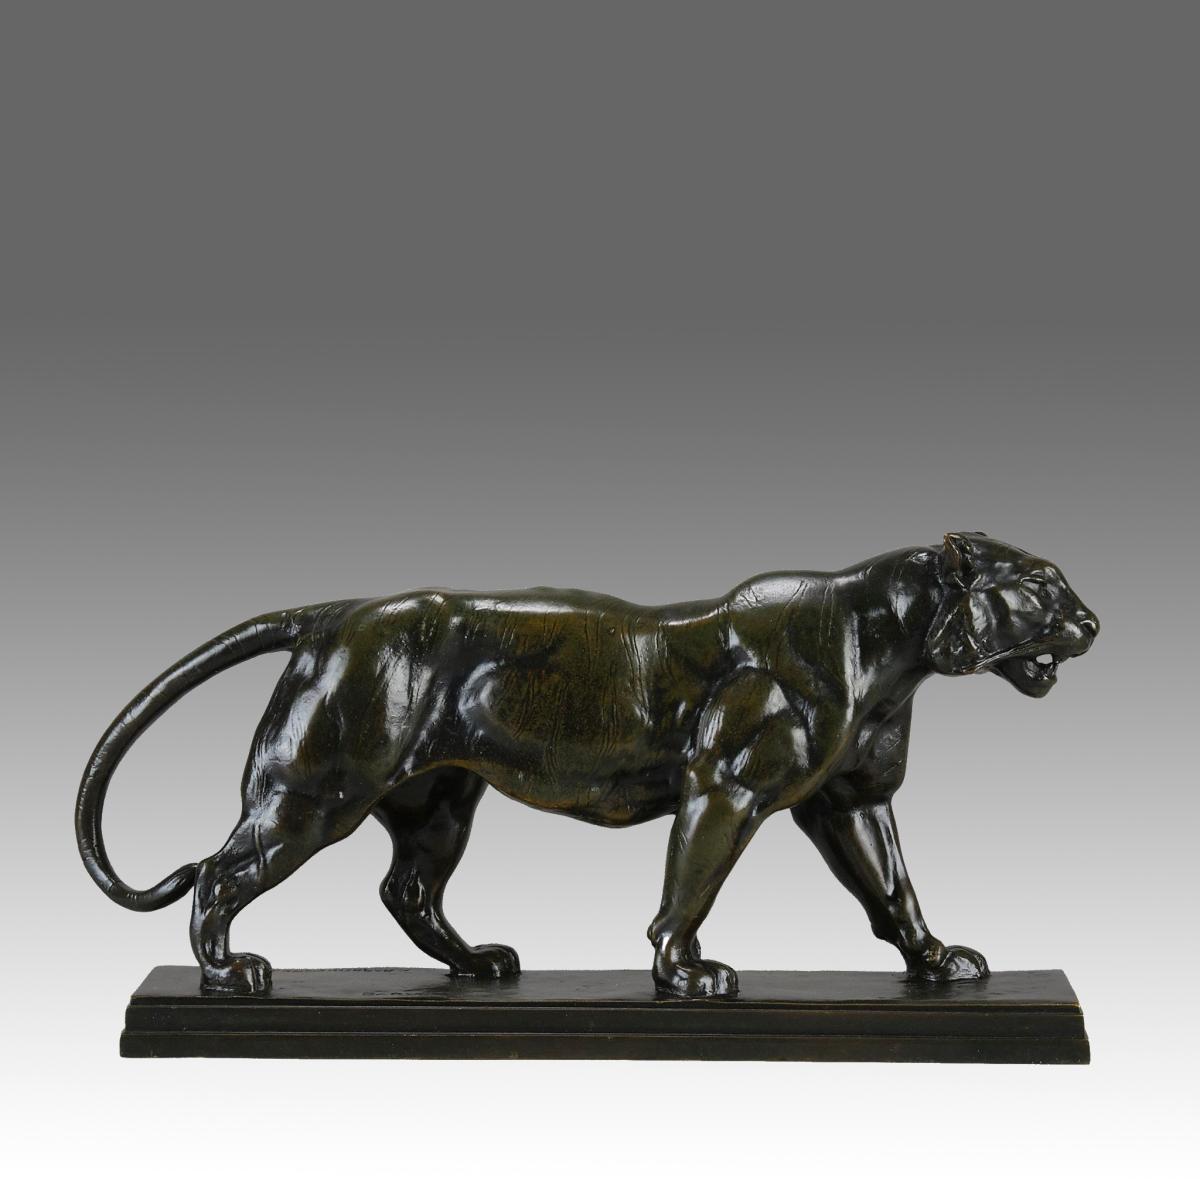 Late 19th Century Animalier Bronze entitled "Tigre qui Marche" by Antoine Barye